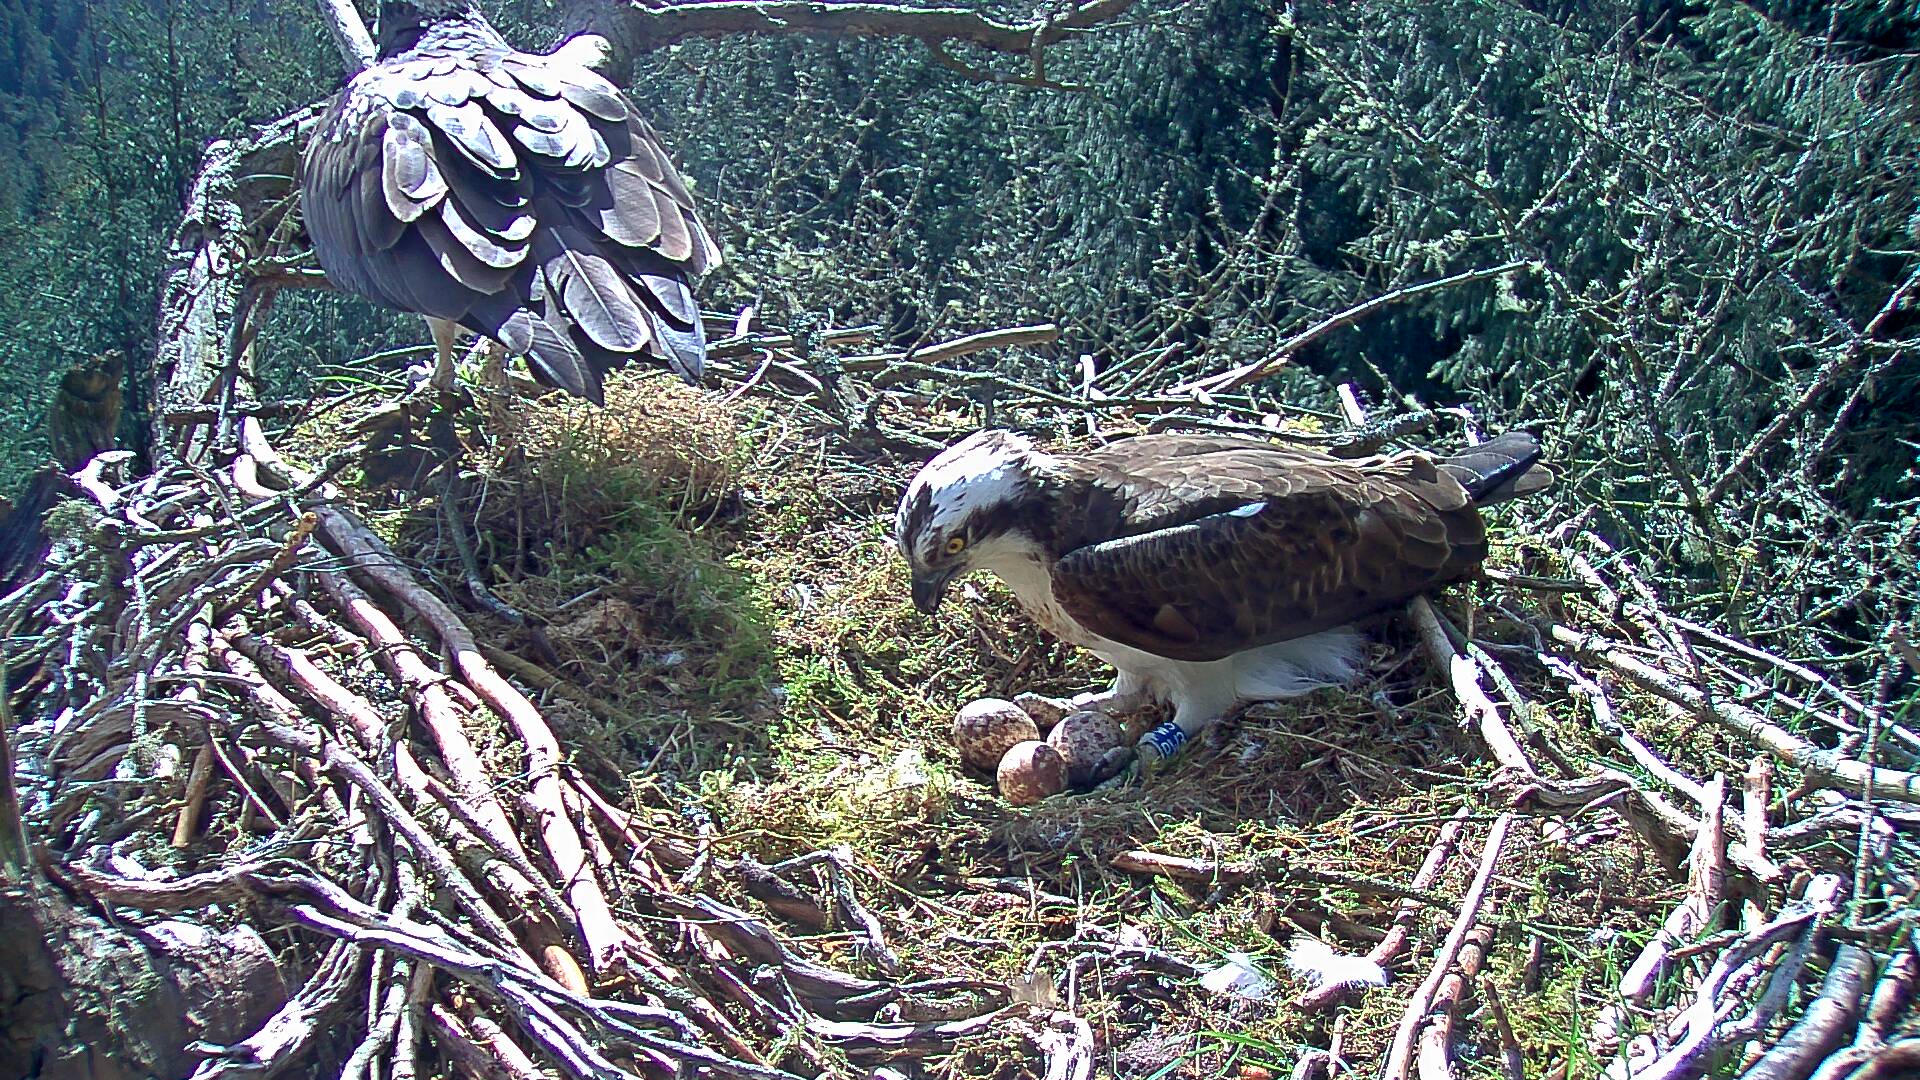 Two oysters in the nest